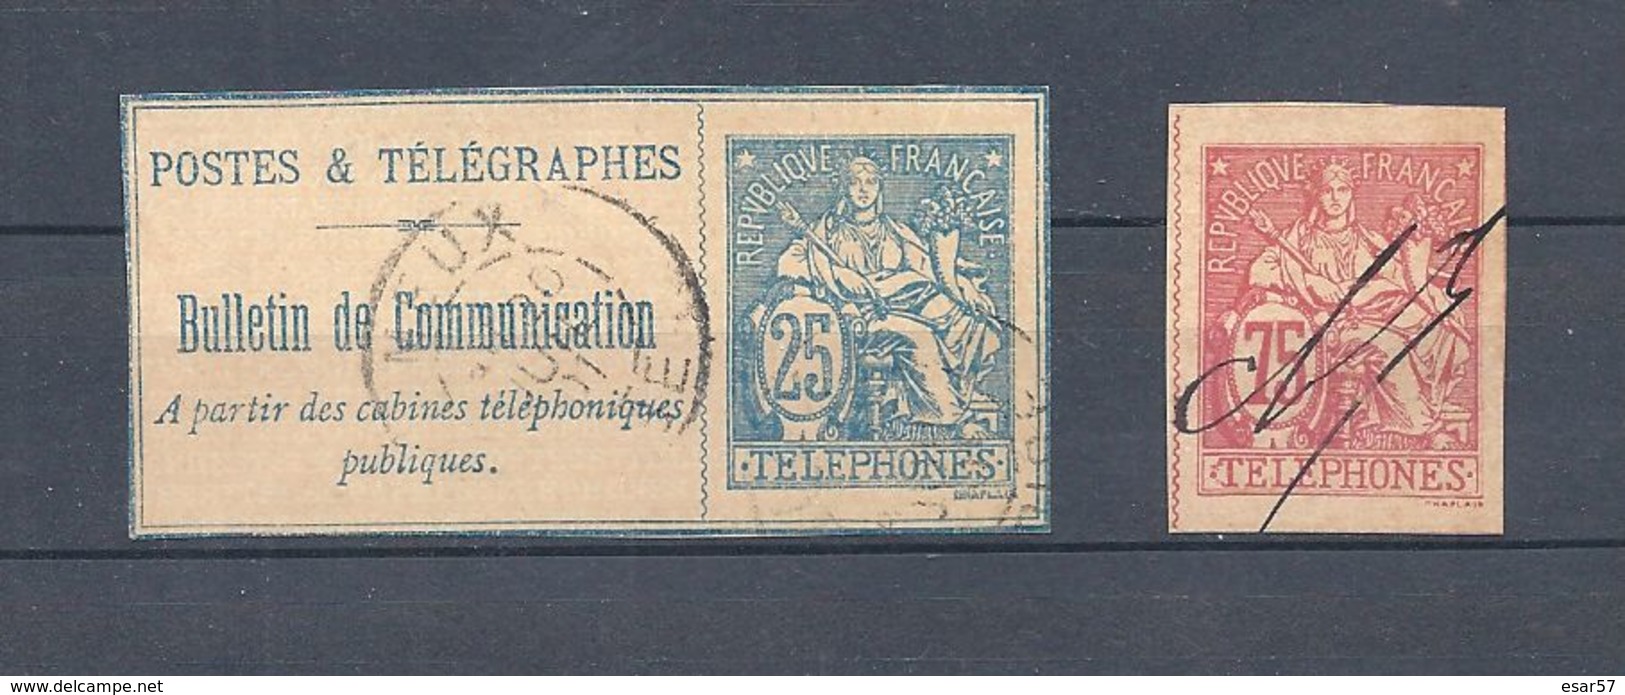 2 Timbres - Telegraph And Telephone